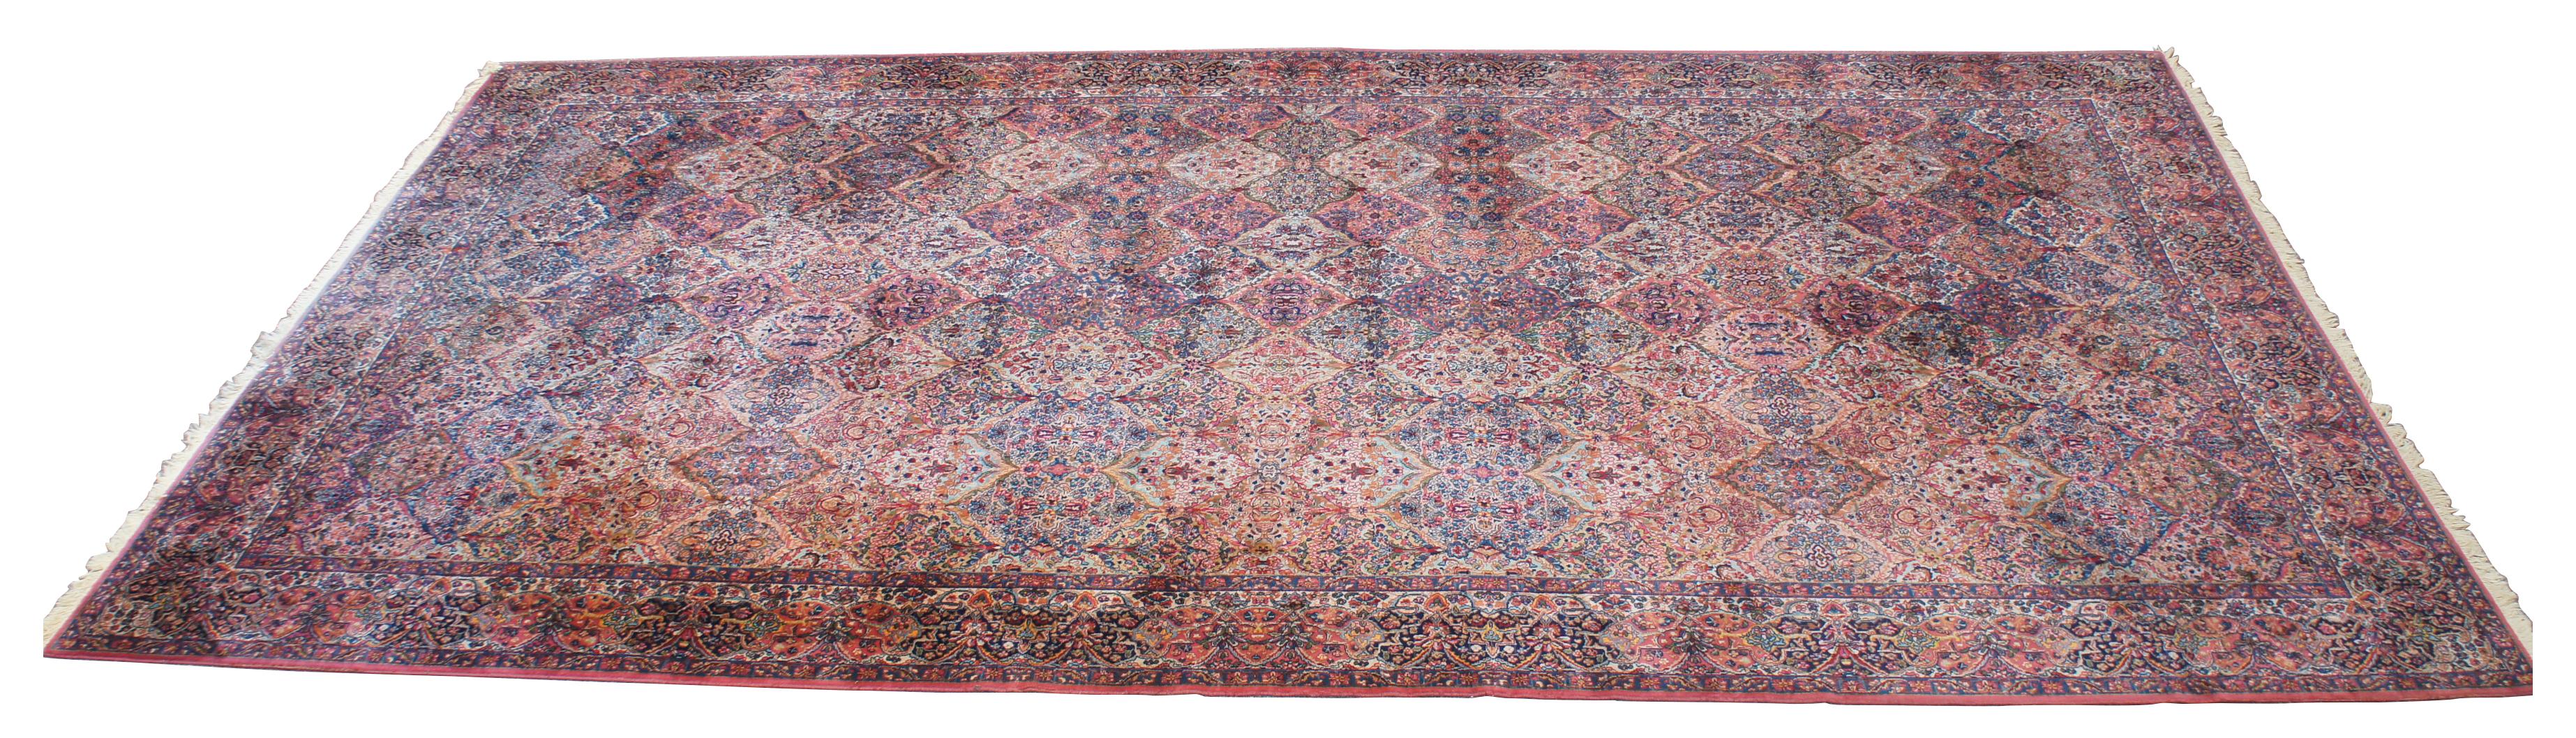 Vintage early Karastan Kirman 717 multi-color panel area rug. Features a geometric and floral motif over a field of reds, with blues, orange, brown, pinks, gold, greens and purples. Measure: 22'.
   